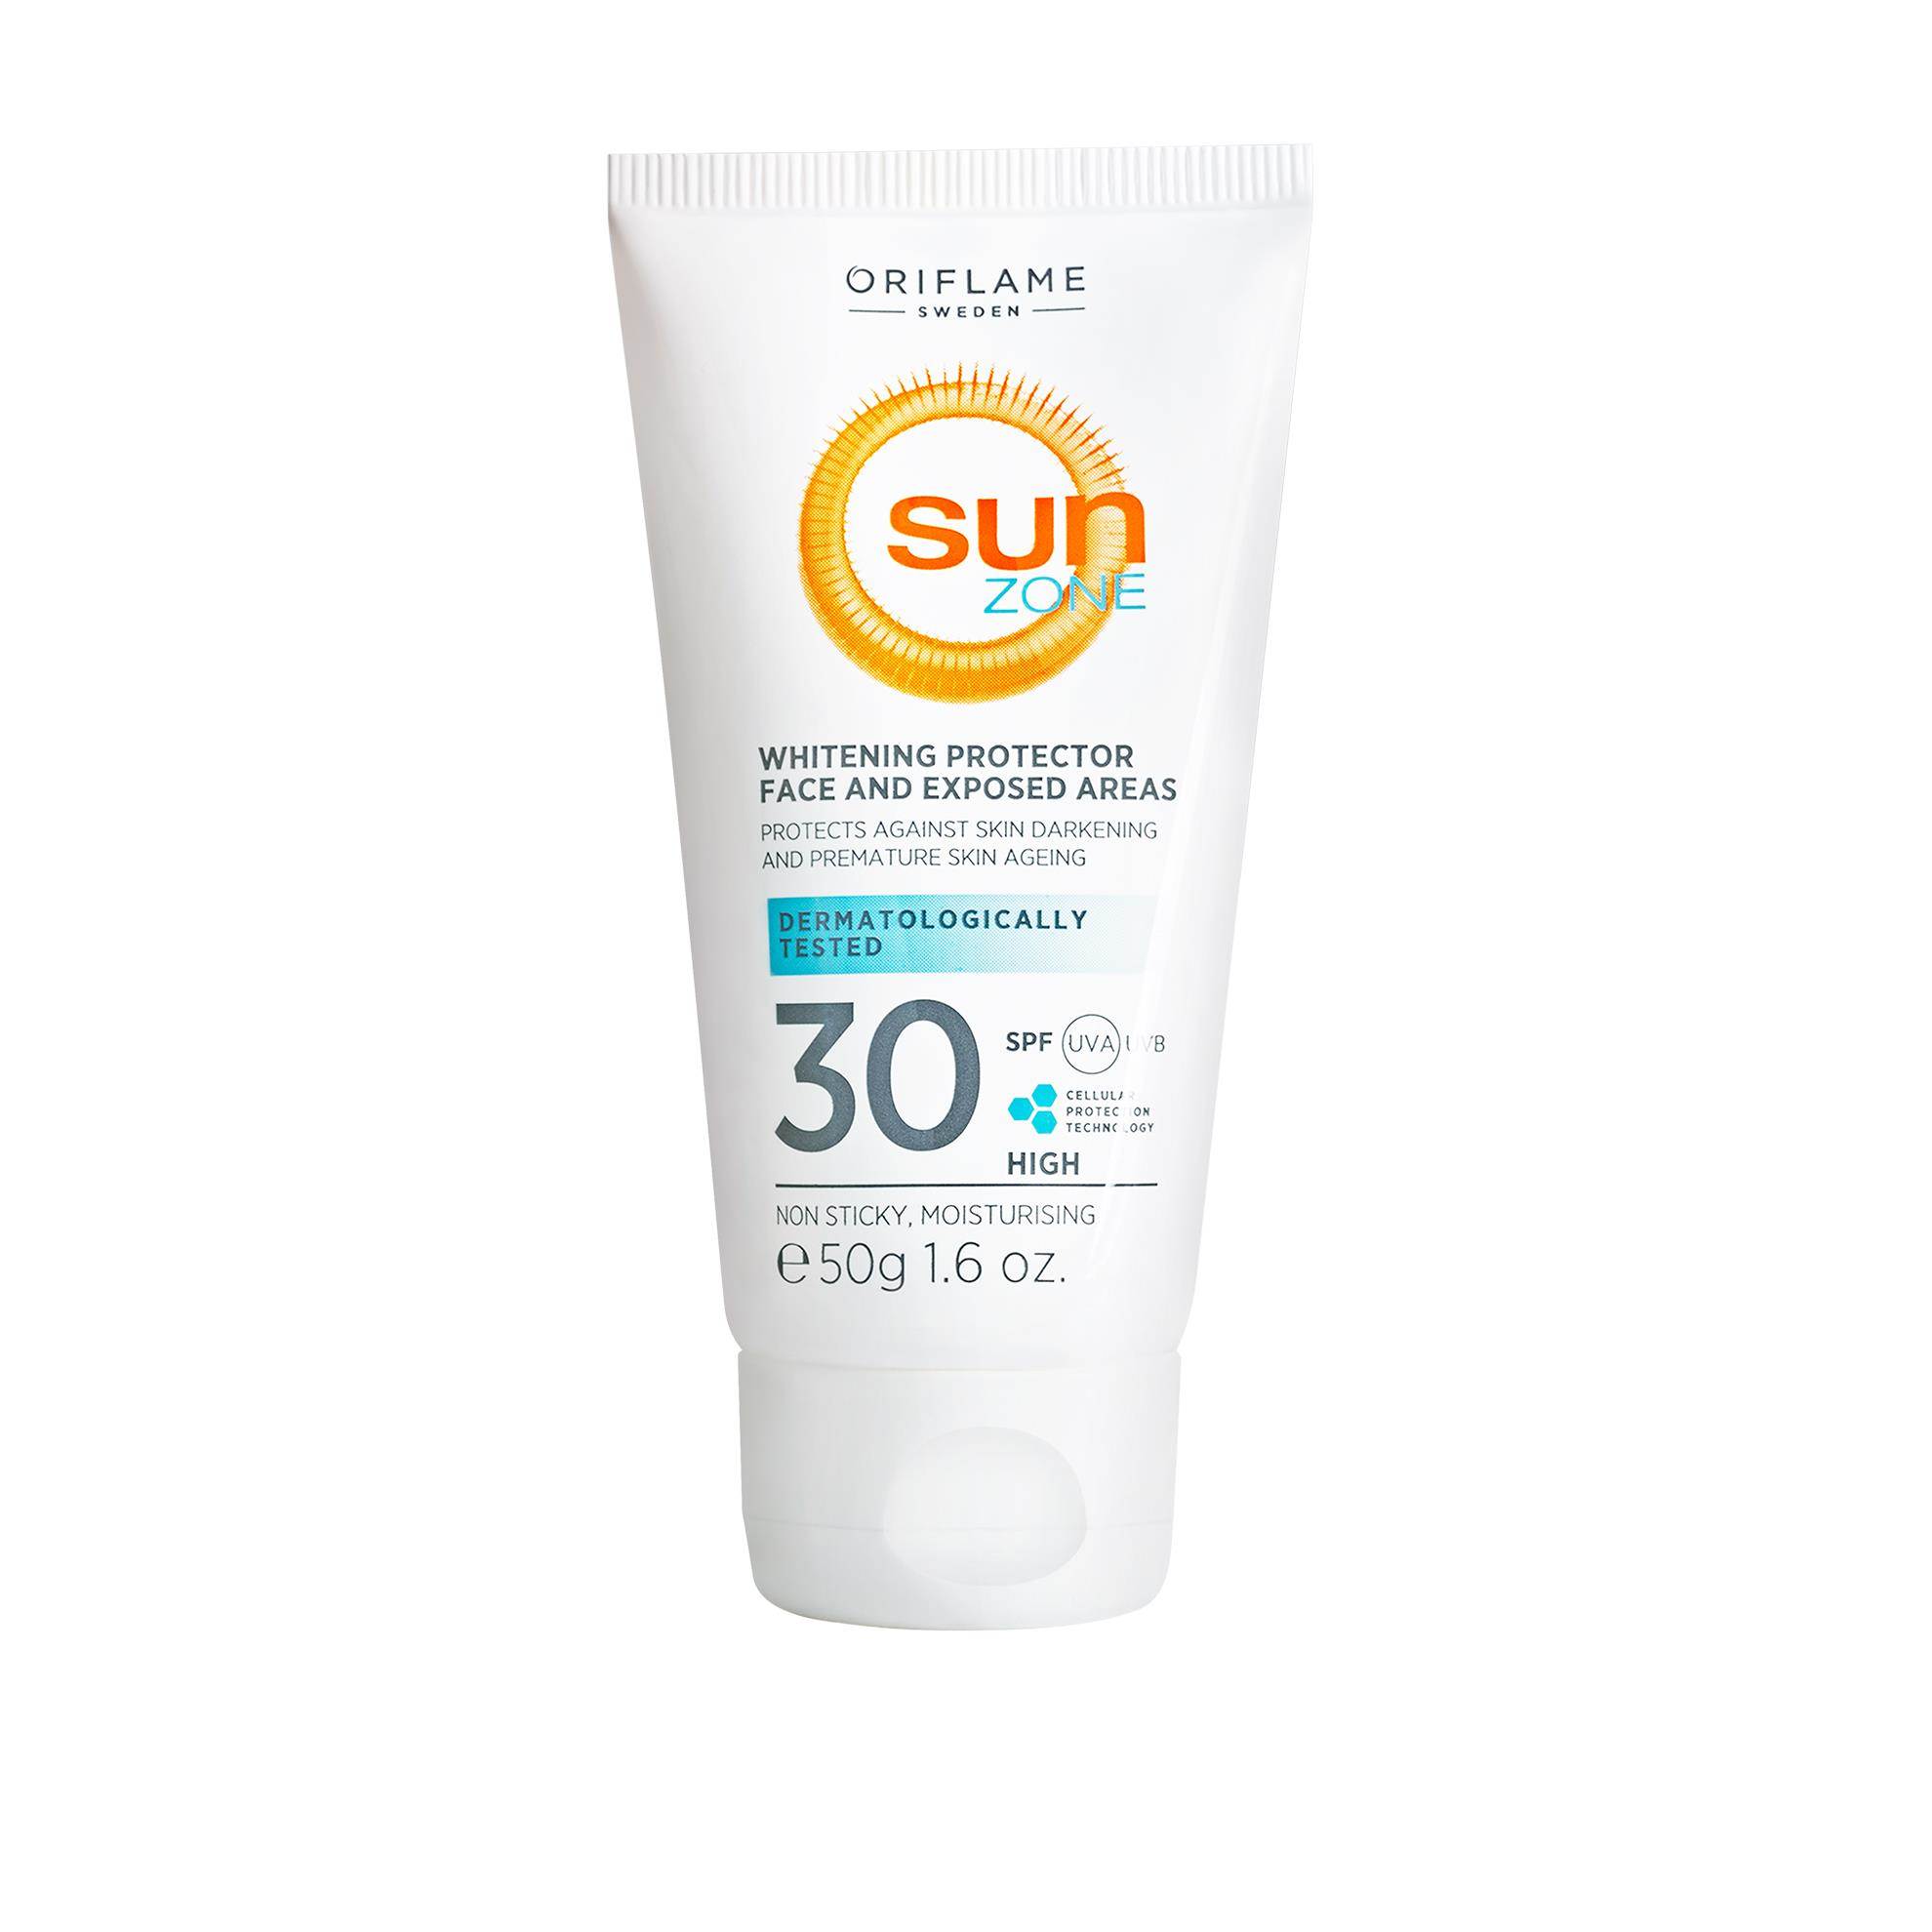 hitening-protector-face-and-exposed-areas-spf30high